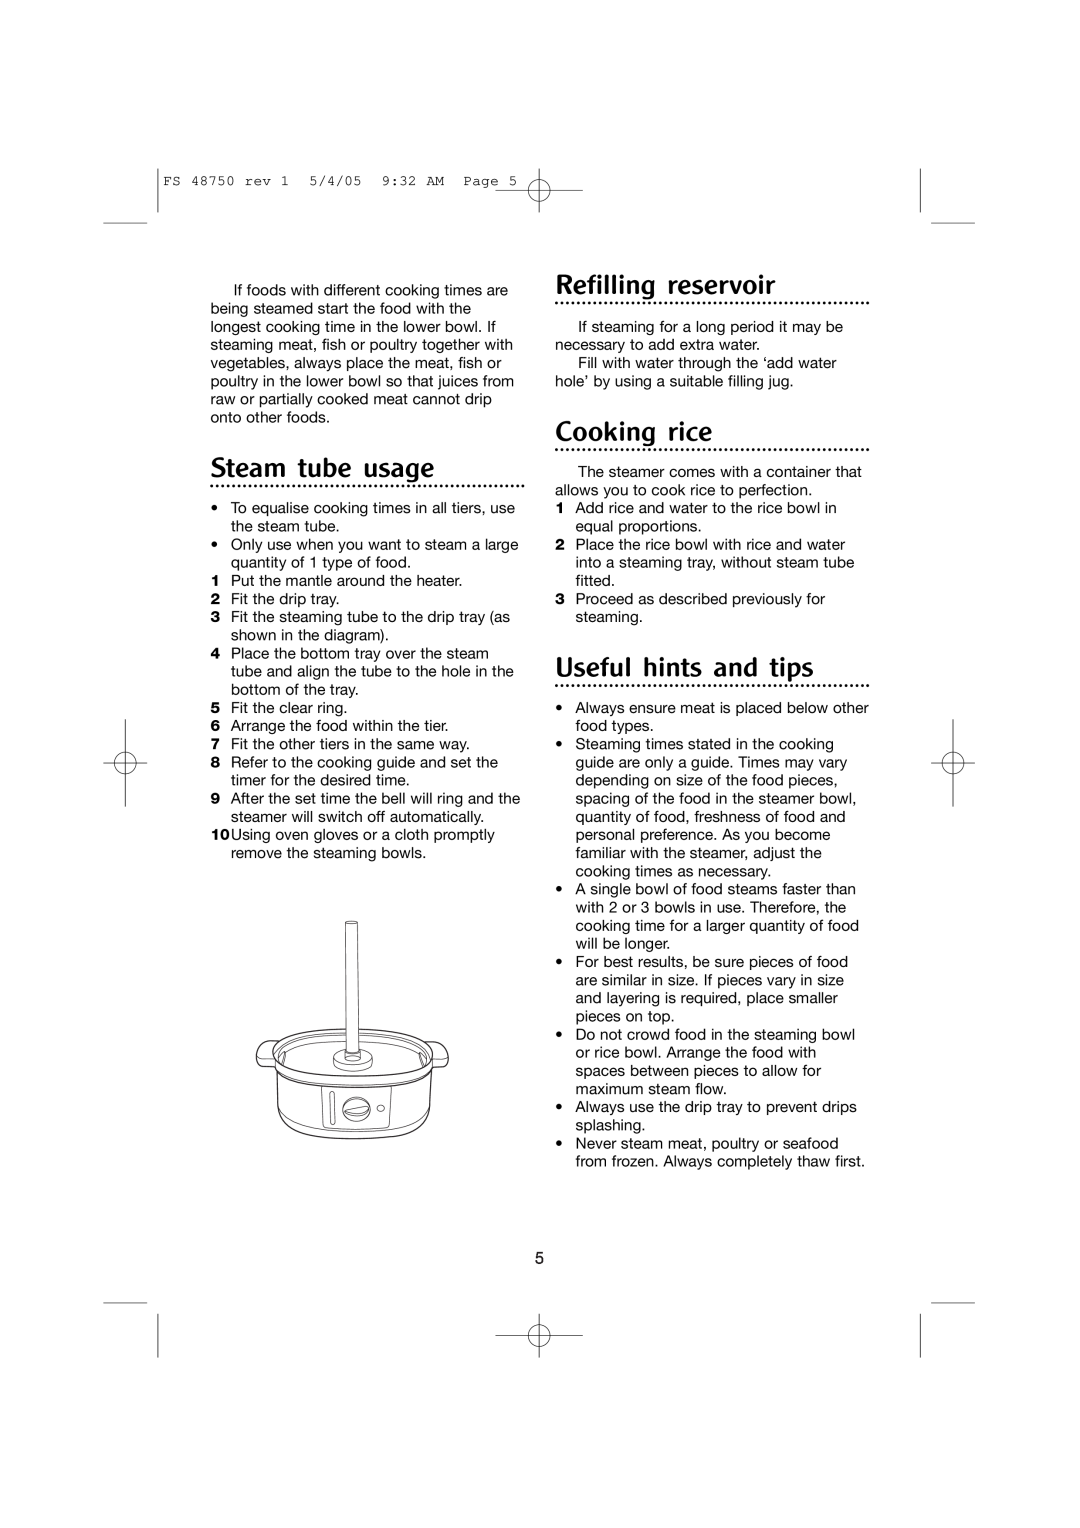 Morphy Richards FS 48750 manual Steam tube usage, Refilling reservoir, Cooking rice, Useful hints and tips 